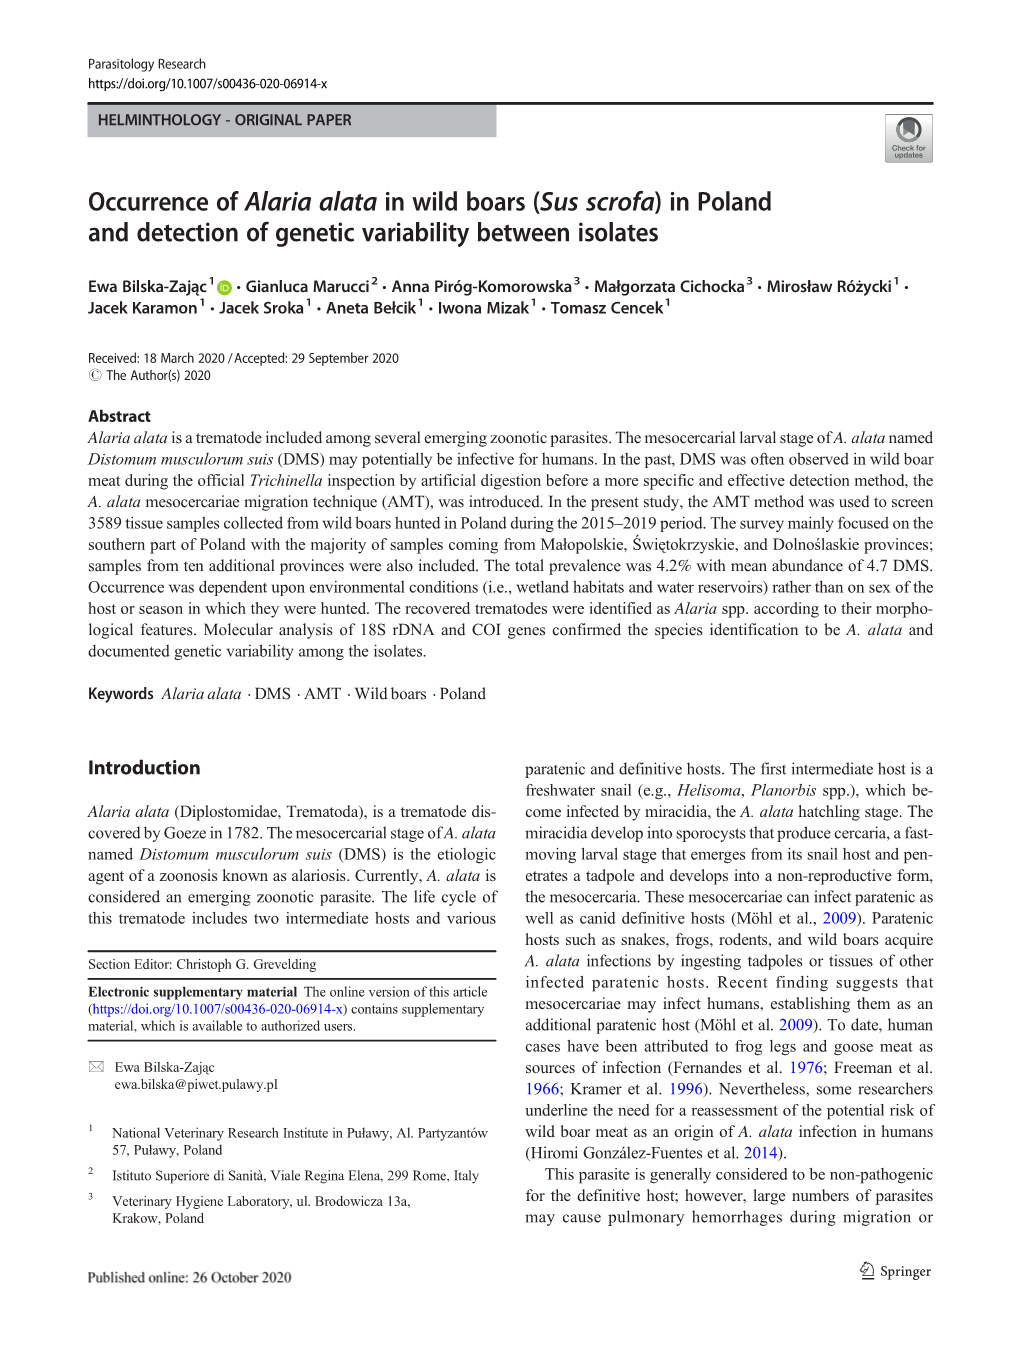 Occurrence of Alaria Alata in Wild Boars (Sus Scrofa) in Poland and Detection of Genetic Variability Between Isolates